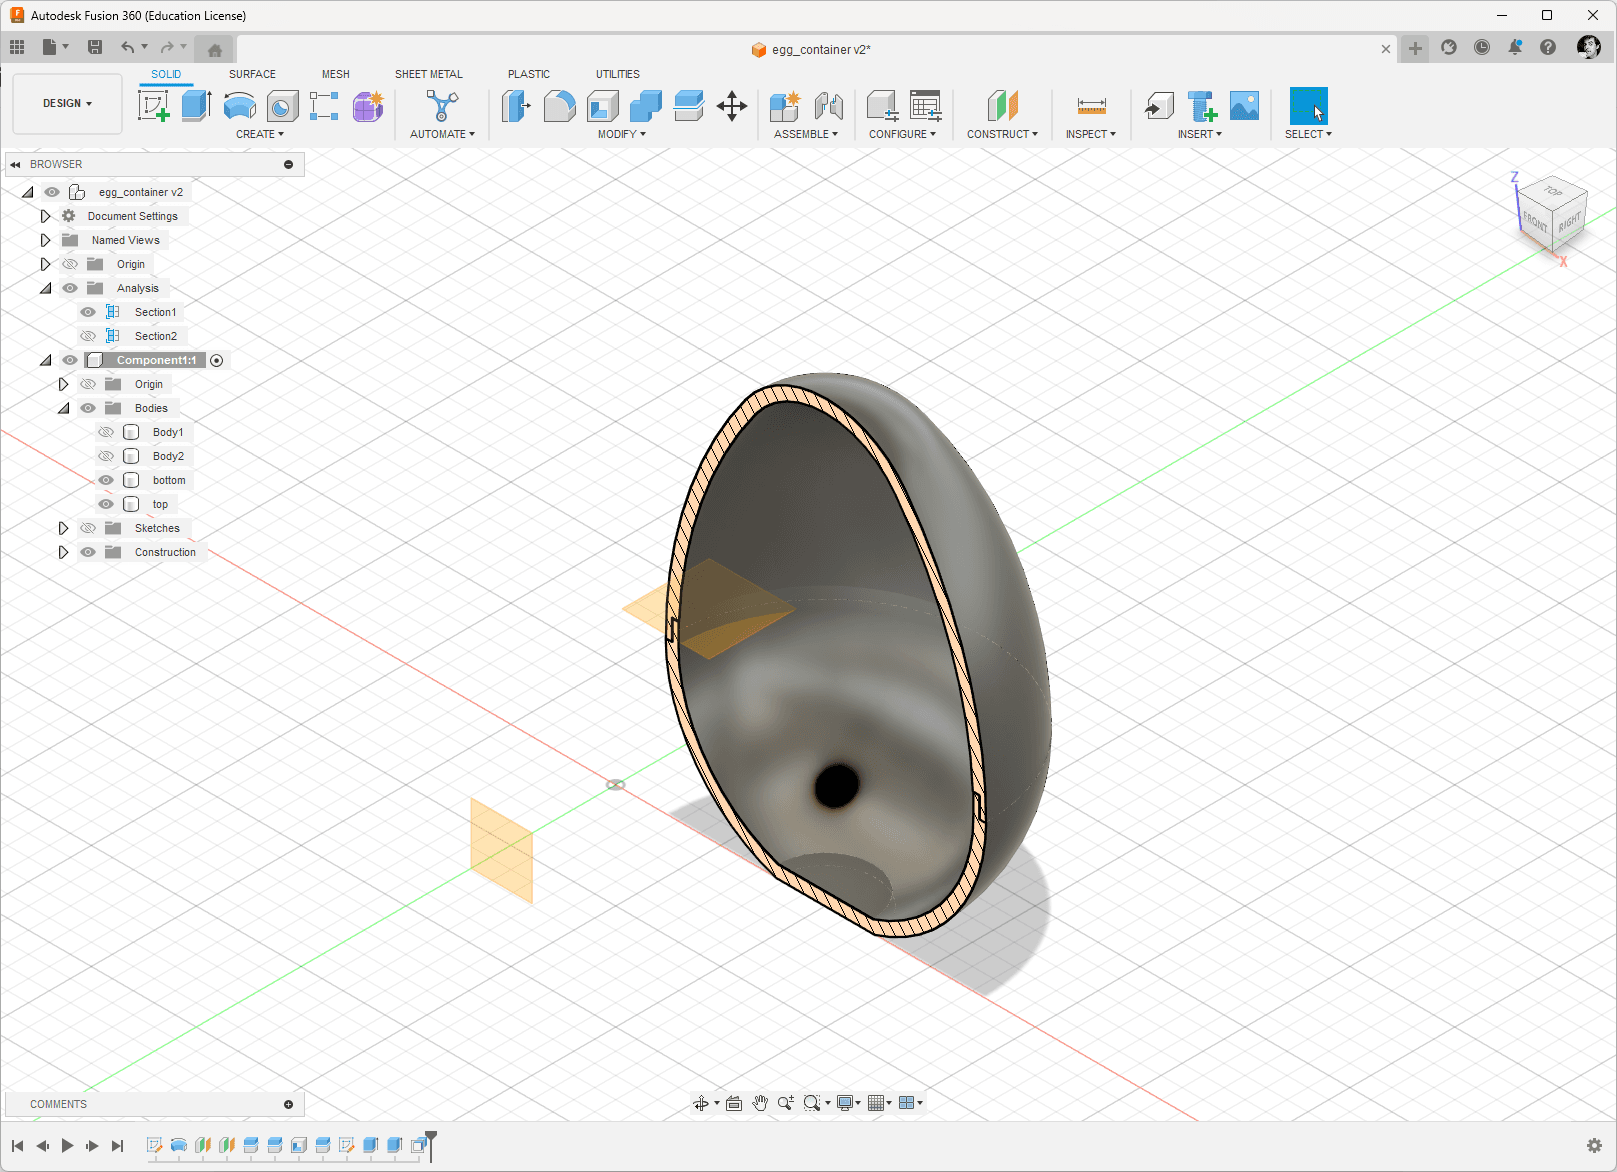 An egg container 3d model